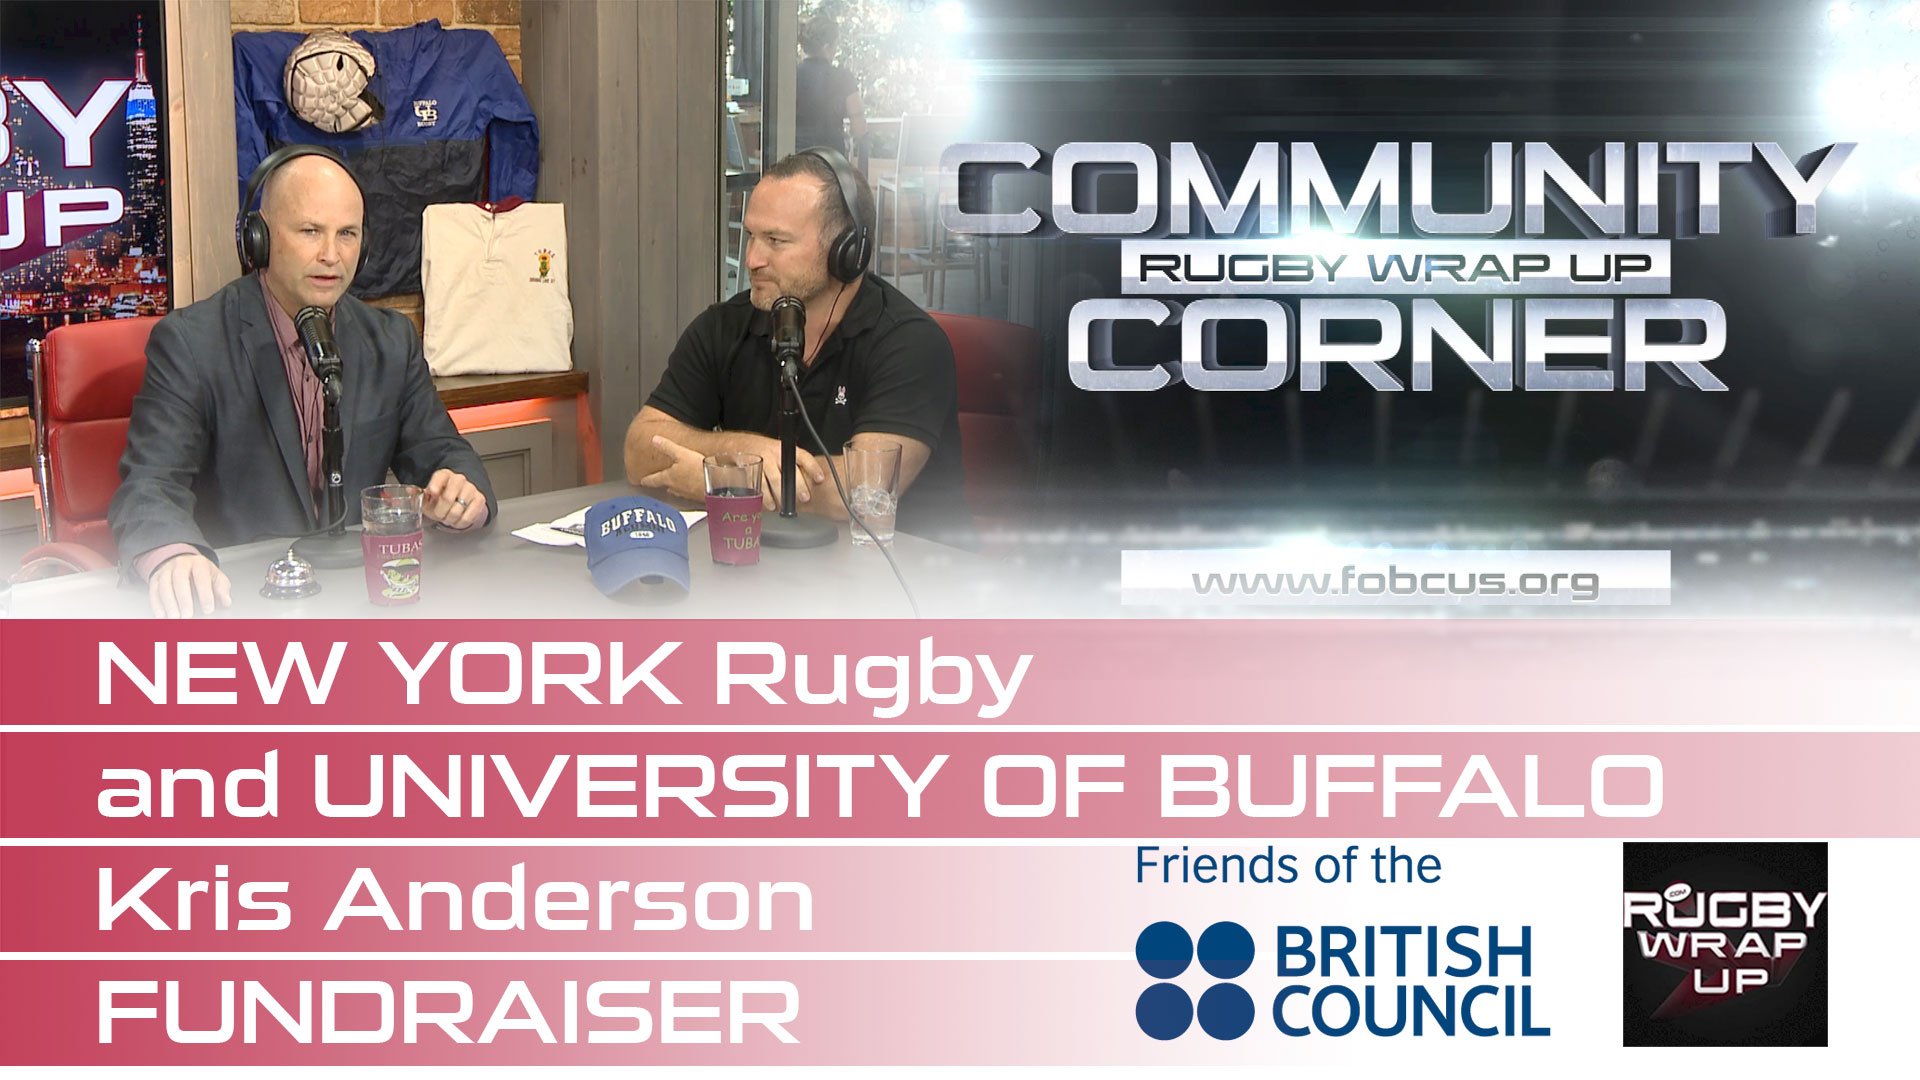 Fallen UB Rugby & New York Rugby Club's Kris Anderson Needs Help